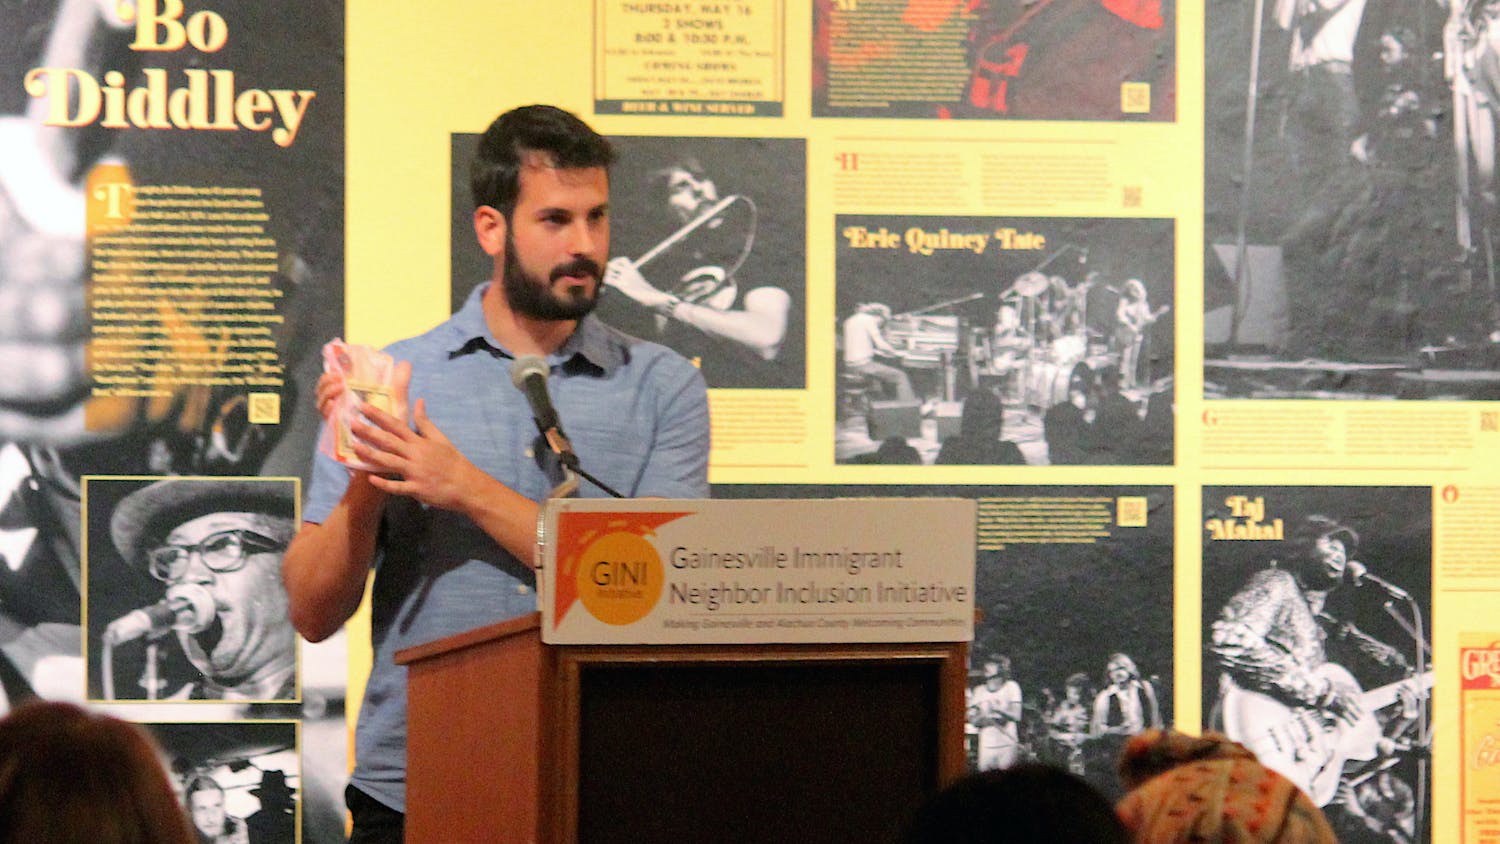 Board member of the Gainesville Immigrant Neighbor Inclusion Initiative Ethan Maia de Needell speaks at the GINI Anniversary celebration at the Matheson History Museum on Friday, Sept. 8, 2023. Ethan Maia de Needell, miembro de la junta de Inclusión de Vecinos Inmigrantes de Gainesville [Gainesville Immigrant Neighbor Inclusion], habla en la celebración del aniversario de GINI en el Museo de Historia de Matheson el viernes 8 de septiembre de 2023.